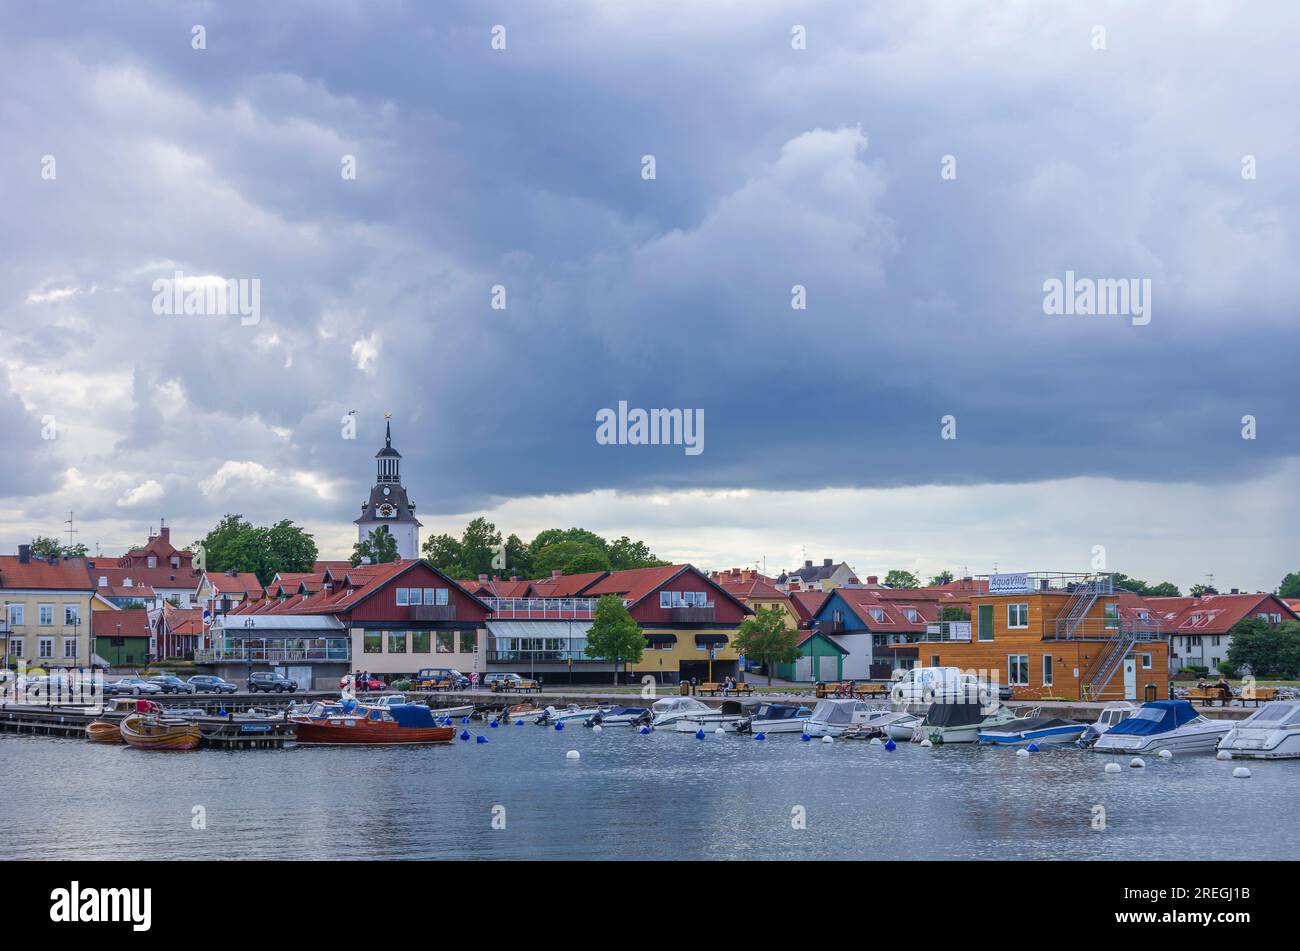 Picturesque view of the waterfront of Västervik, Smaland, Kalmar län, Sweden. Stock Photo